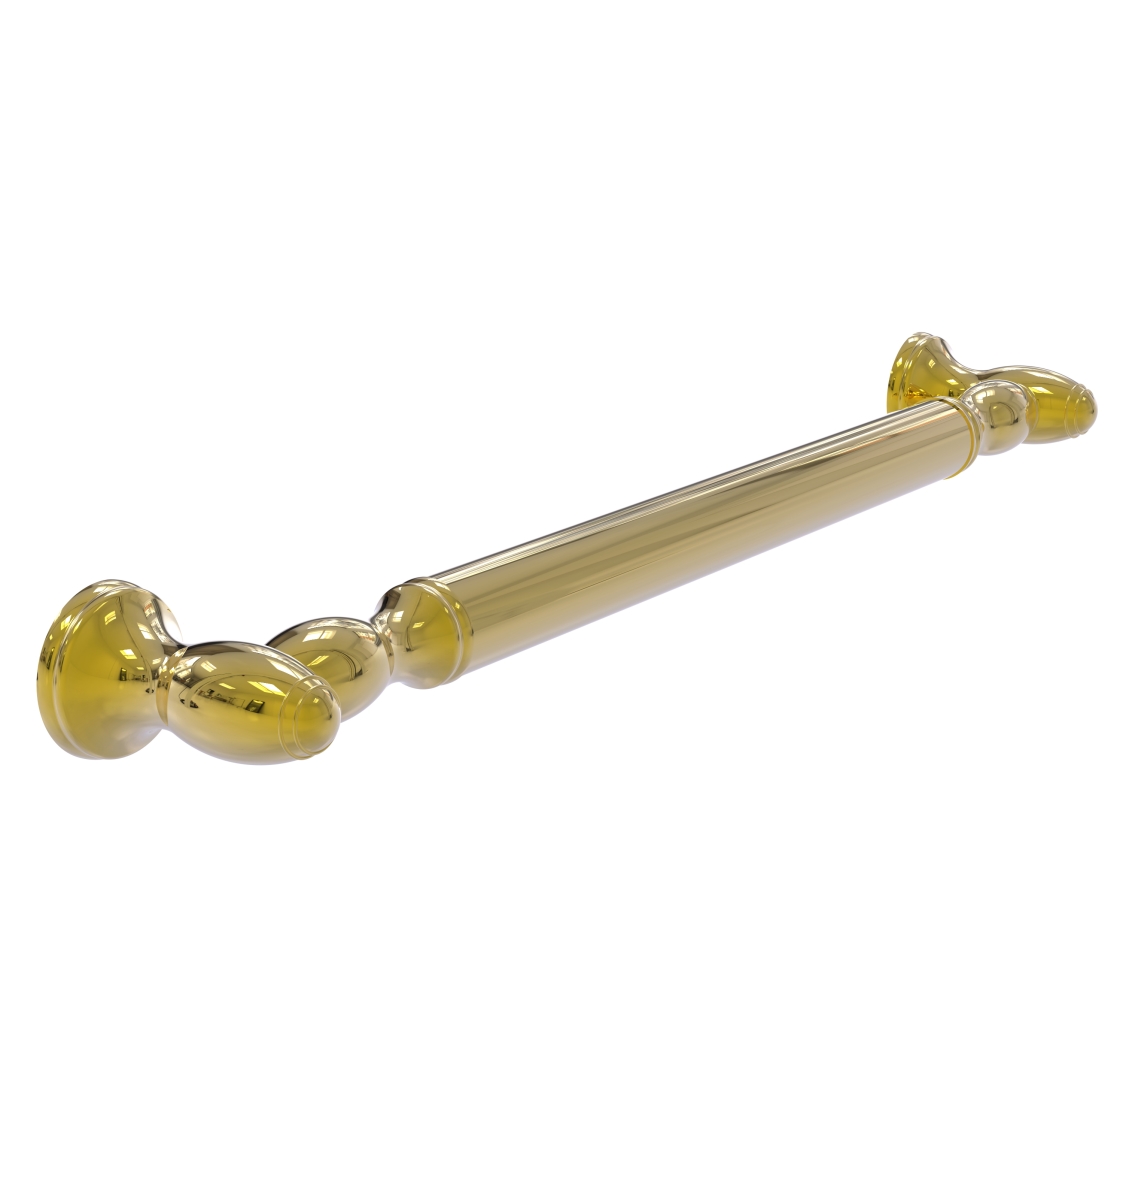 Picture of Allied Brass TD-GRR-36-UNL 36 in. Grab Bar Reeded, Unlacquered Brass - 16 x 3.5 x 18 in.